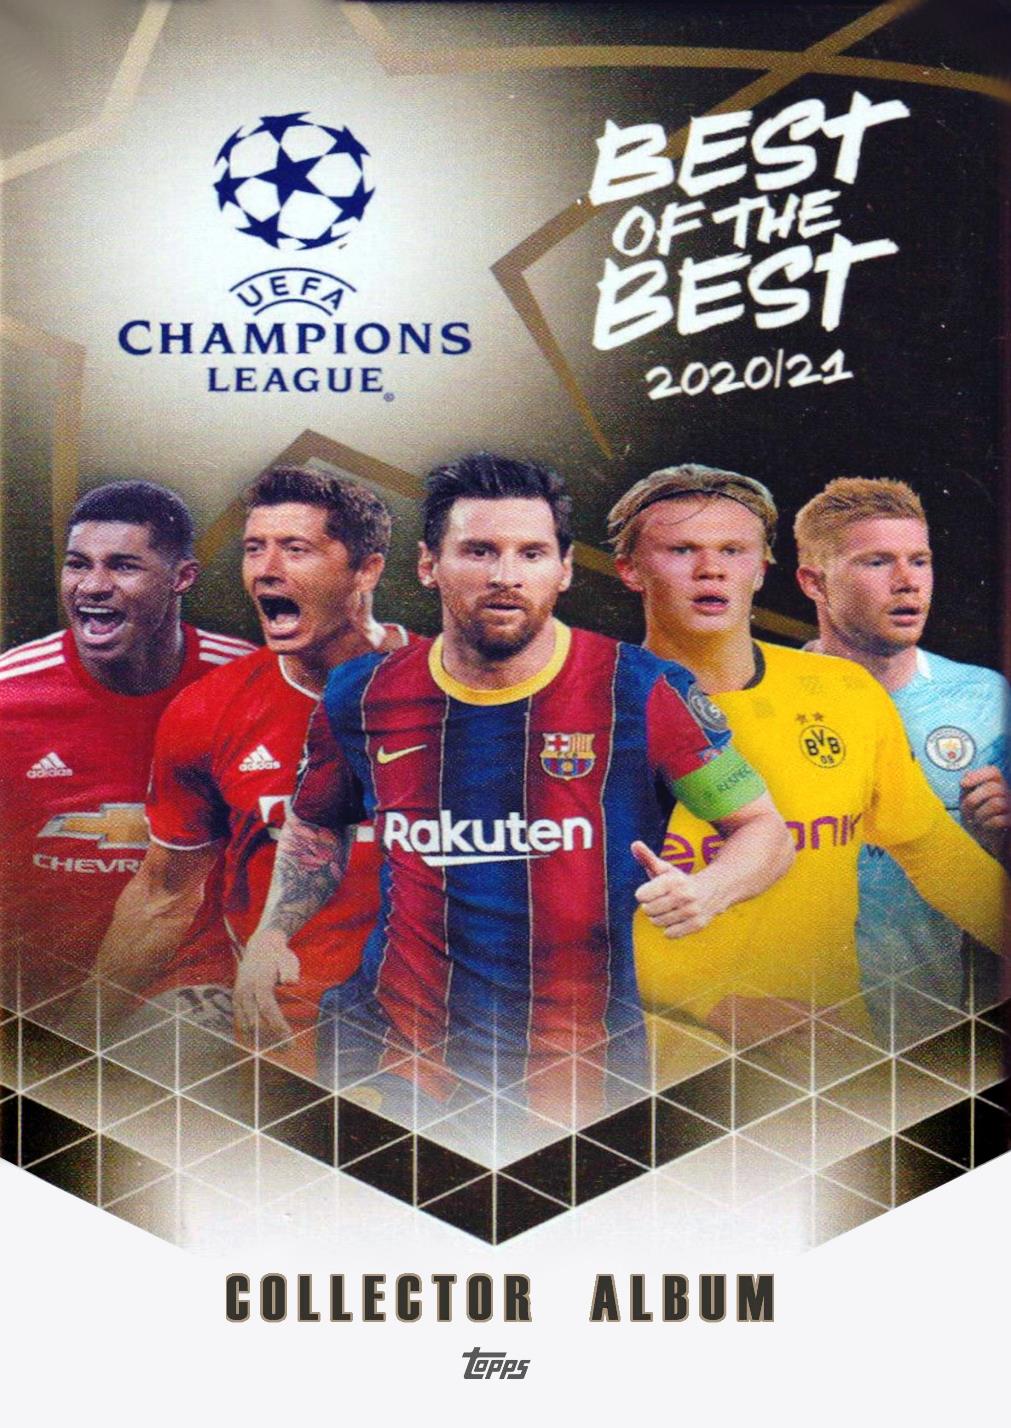 UEFA Champions League 2020-2021 Best of the Best